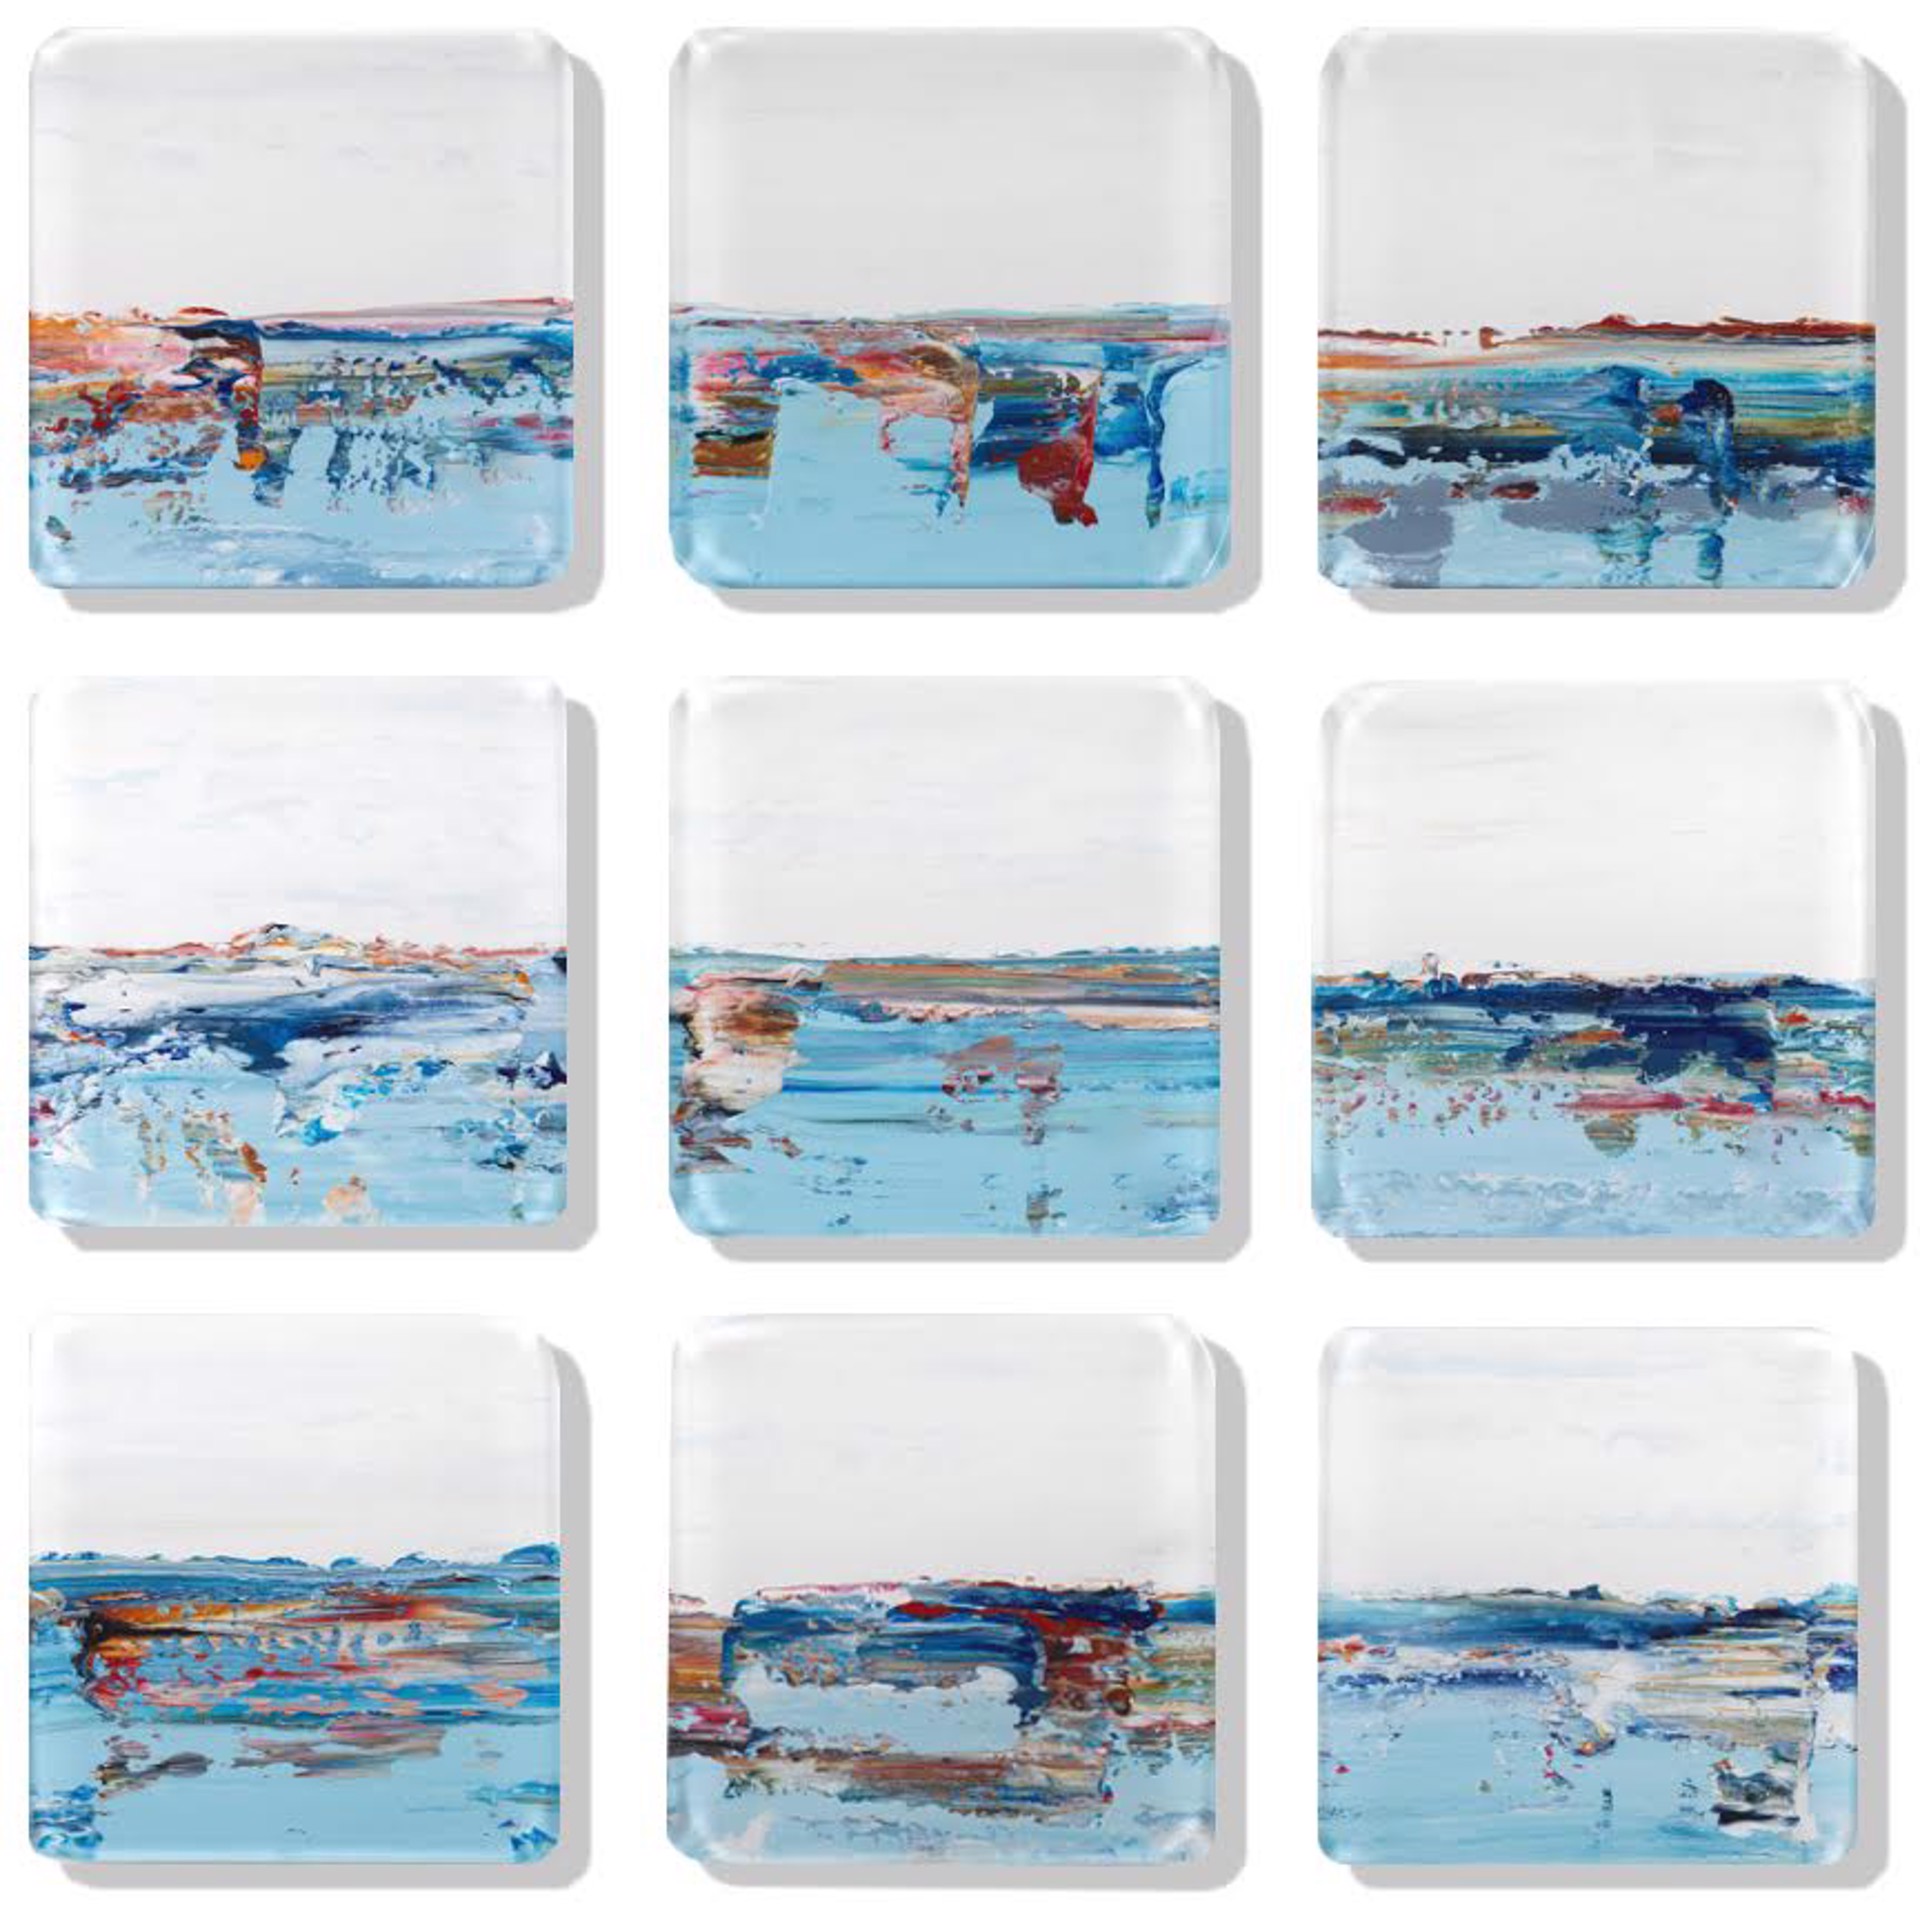 Vetro 0422-02 by South Florida artist and painter John Schuyler is a spectacular 9 panel set of mixed media under glass.